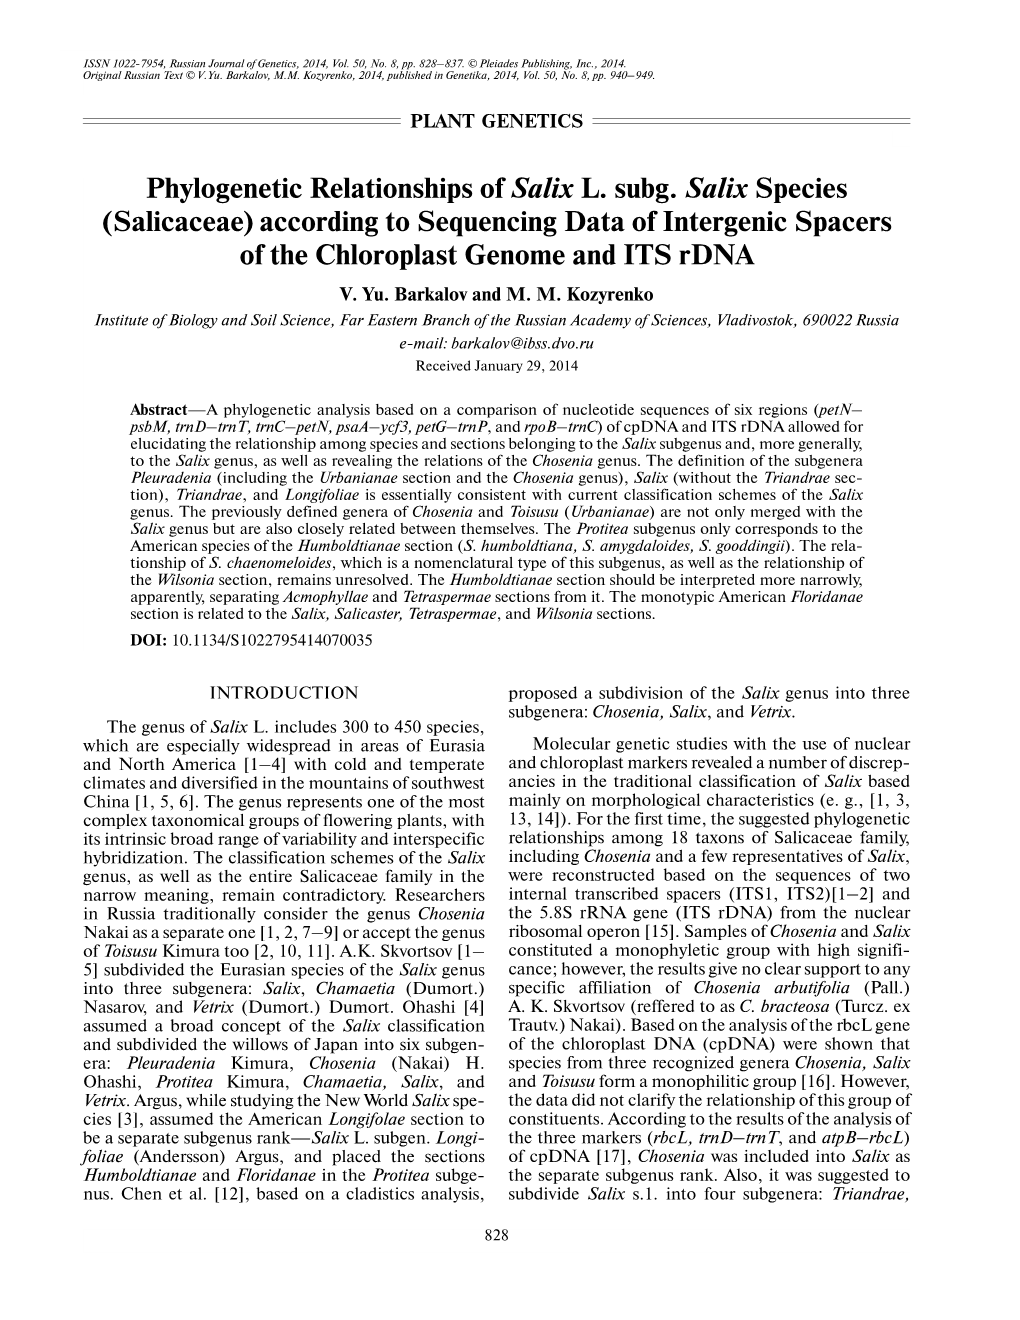 Phylogenetic Relationships of Salix L. Subg. Salix Species (Salicaceae) According to Sequencing Data of Intergenic Spacers of the Chloroplast Genome and ITS Rdna V